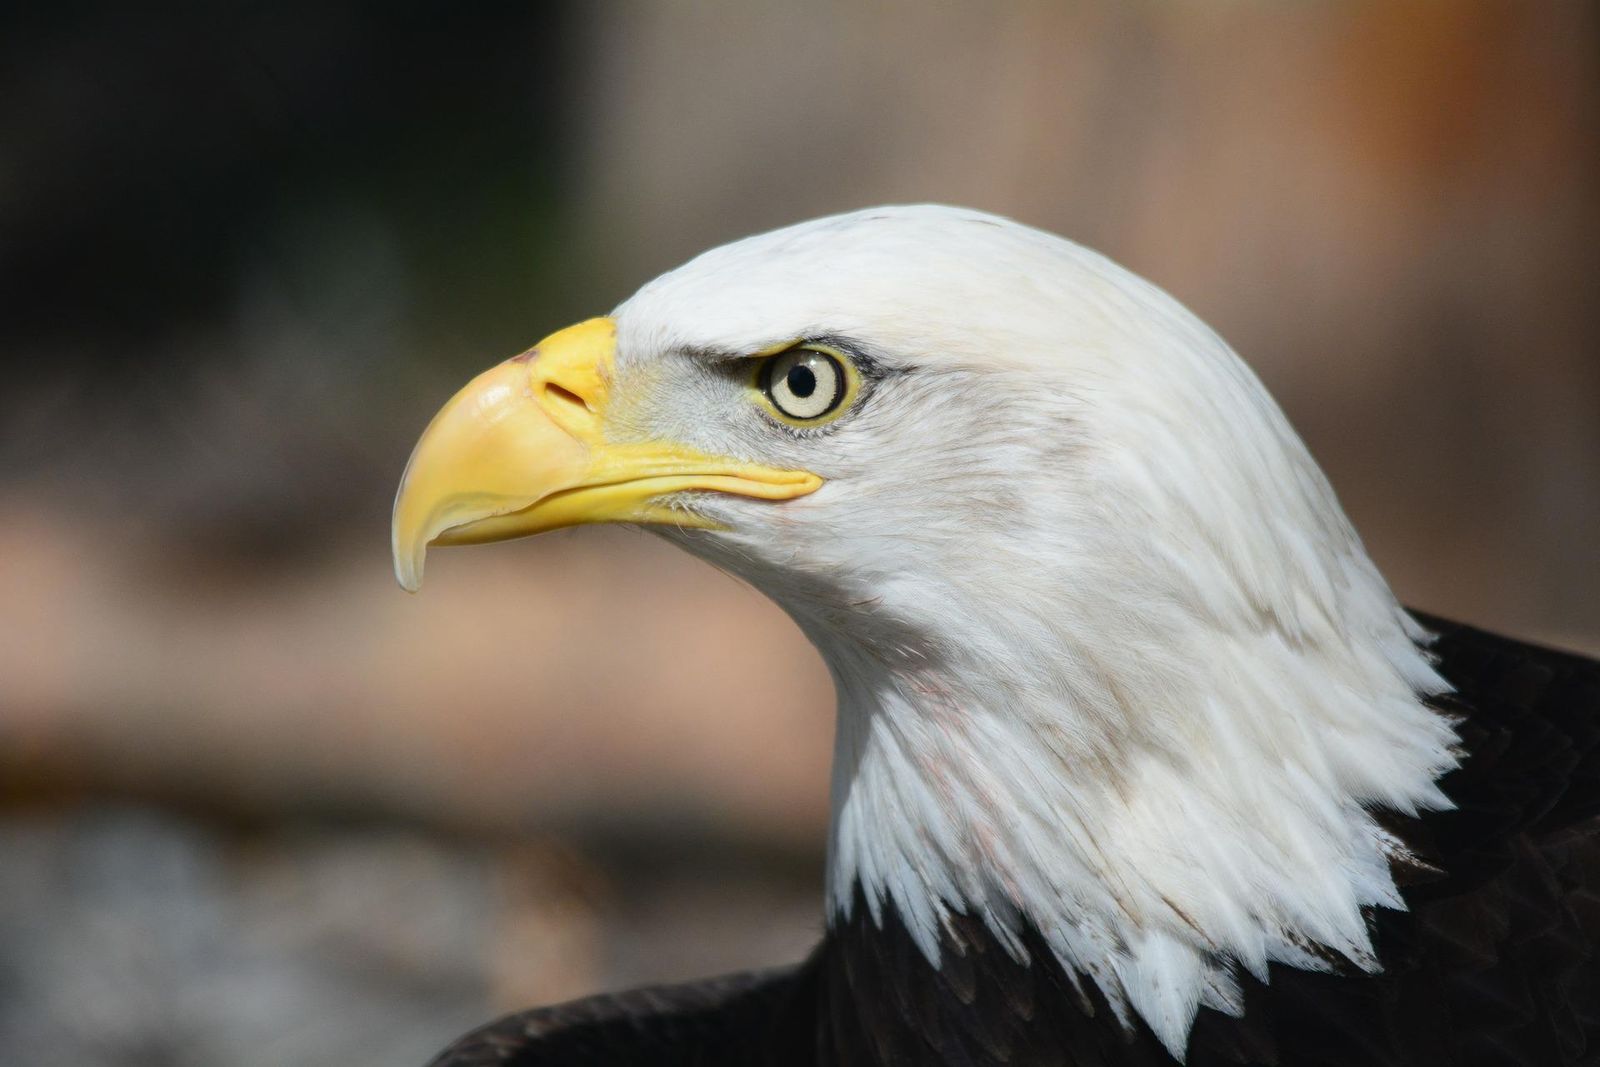 Bald Eagles Are Dying From Bird Flu, Smart News